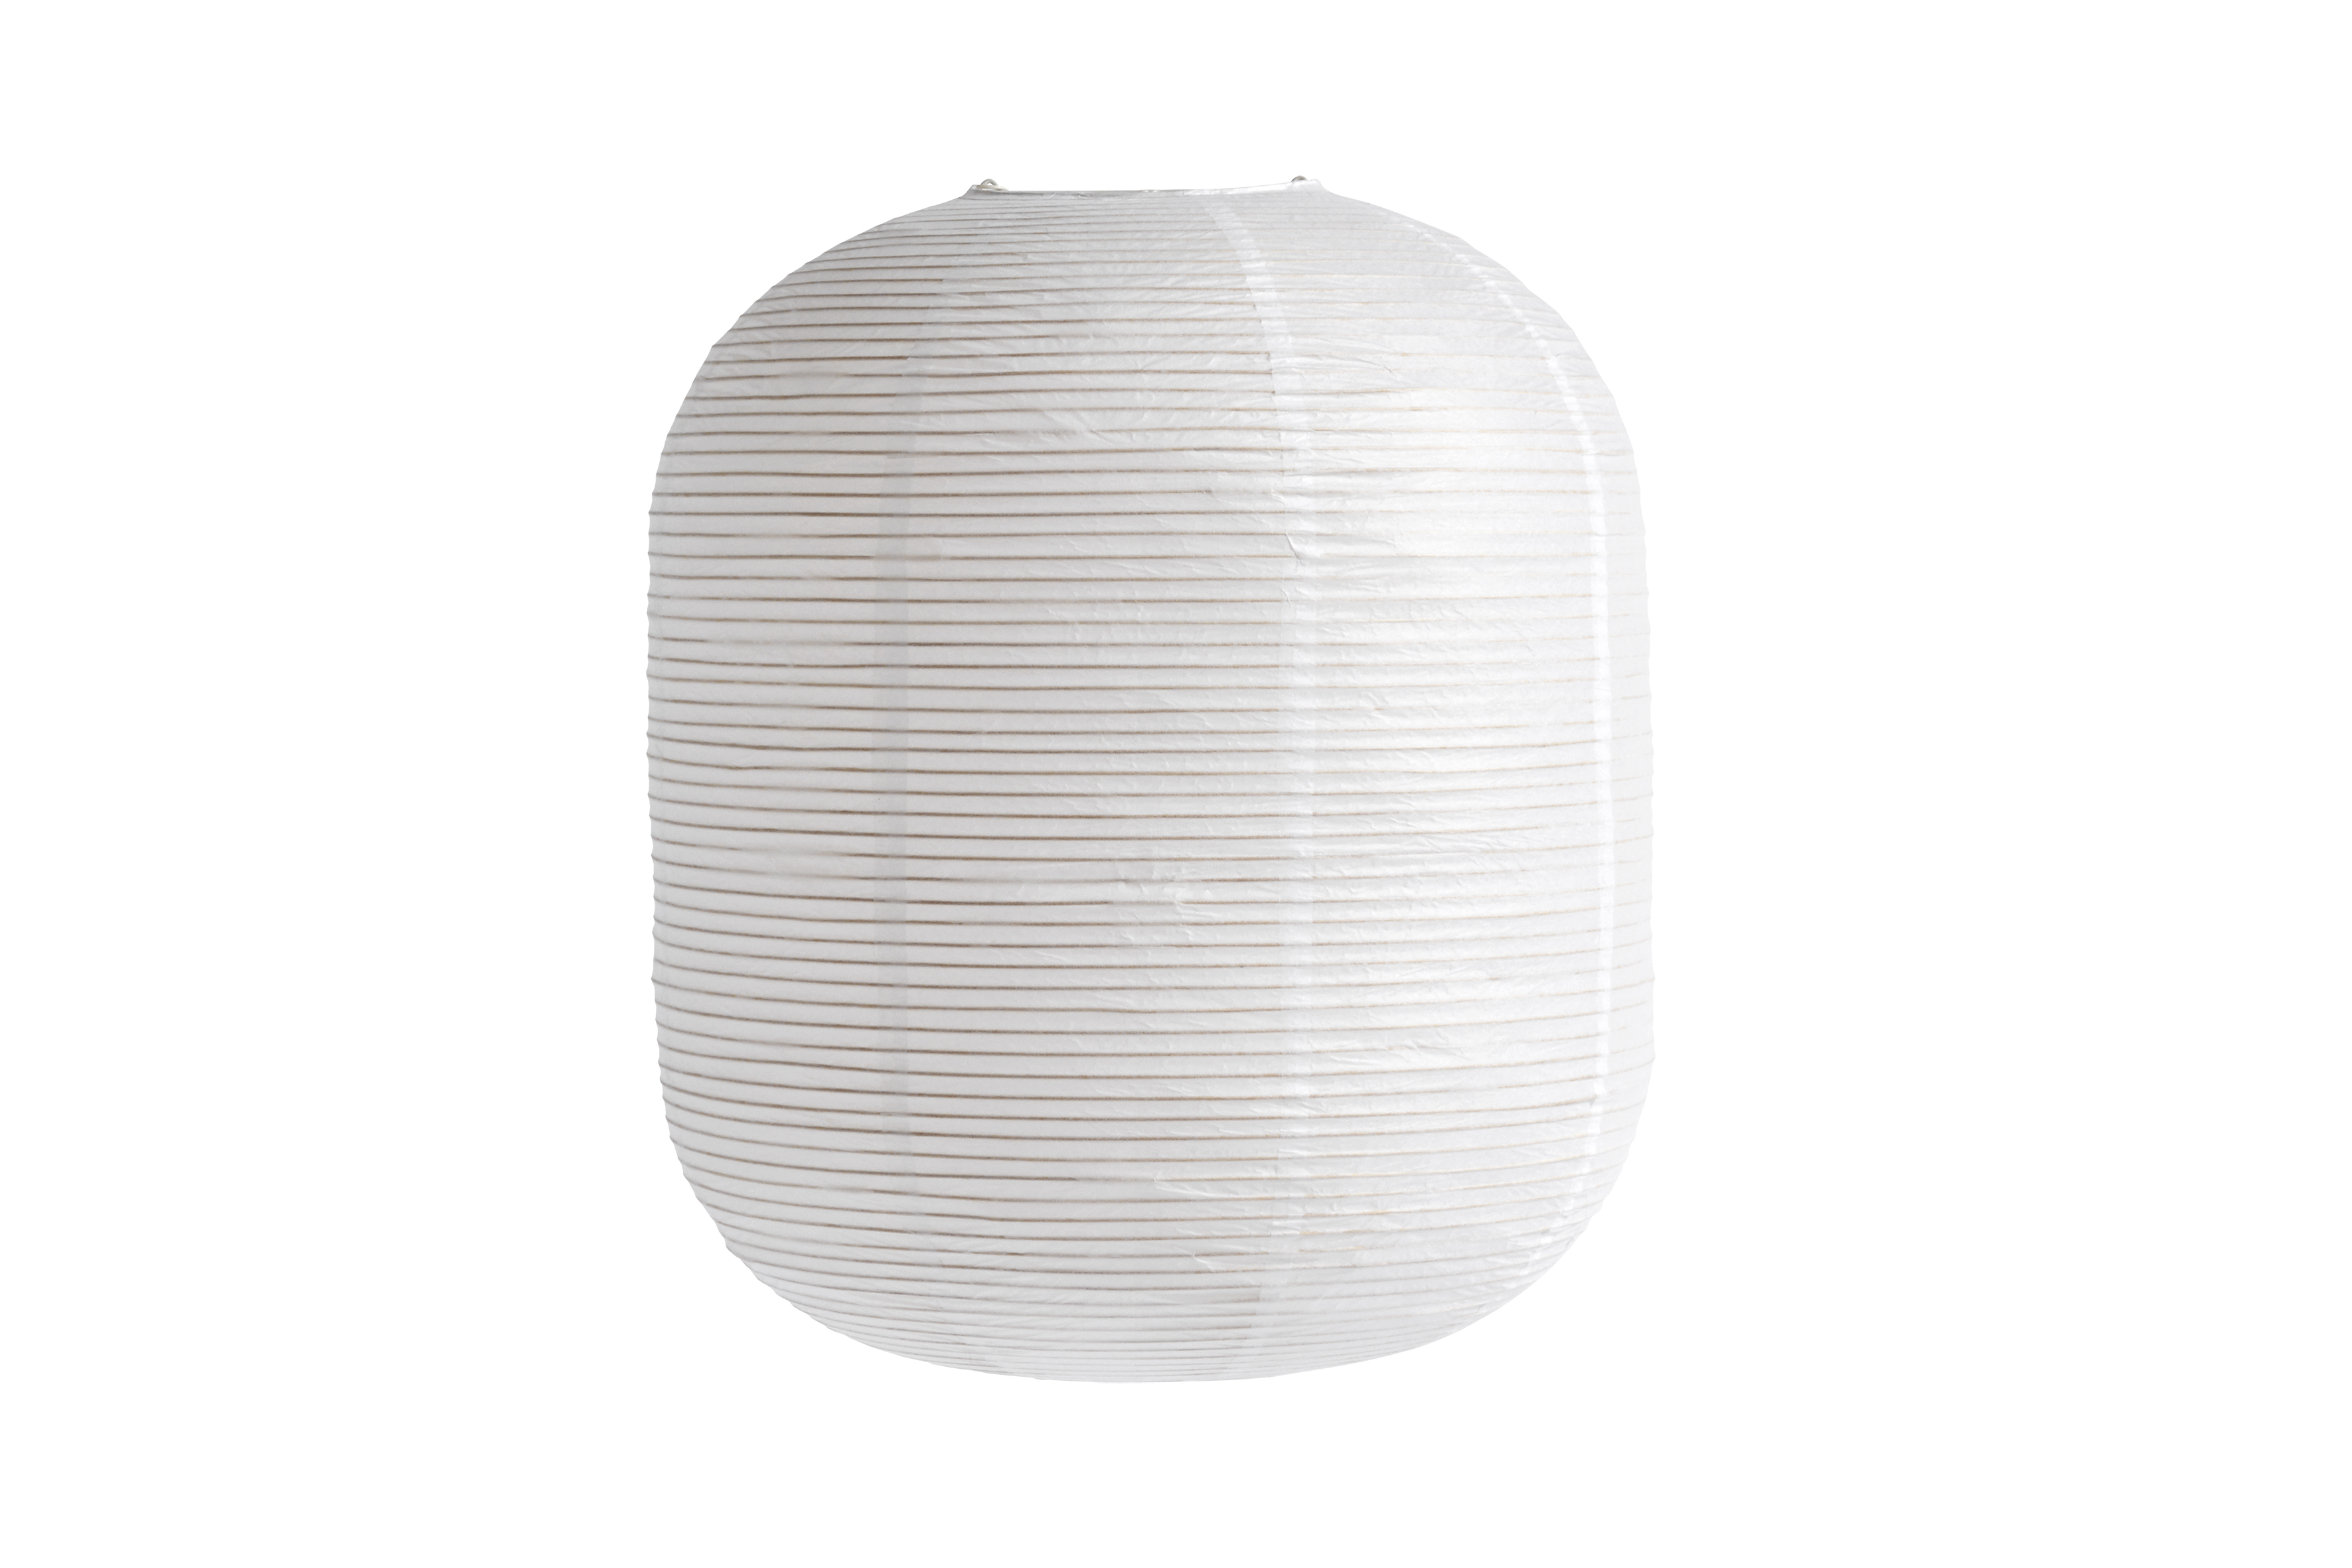 HAY - Rice Paper Shade - Oblong Classic White (507465)